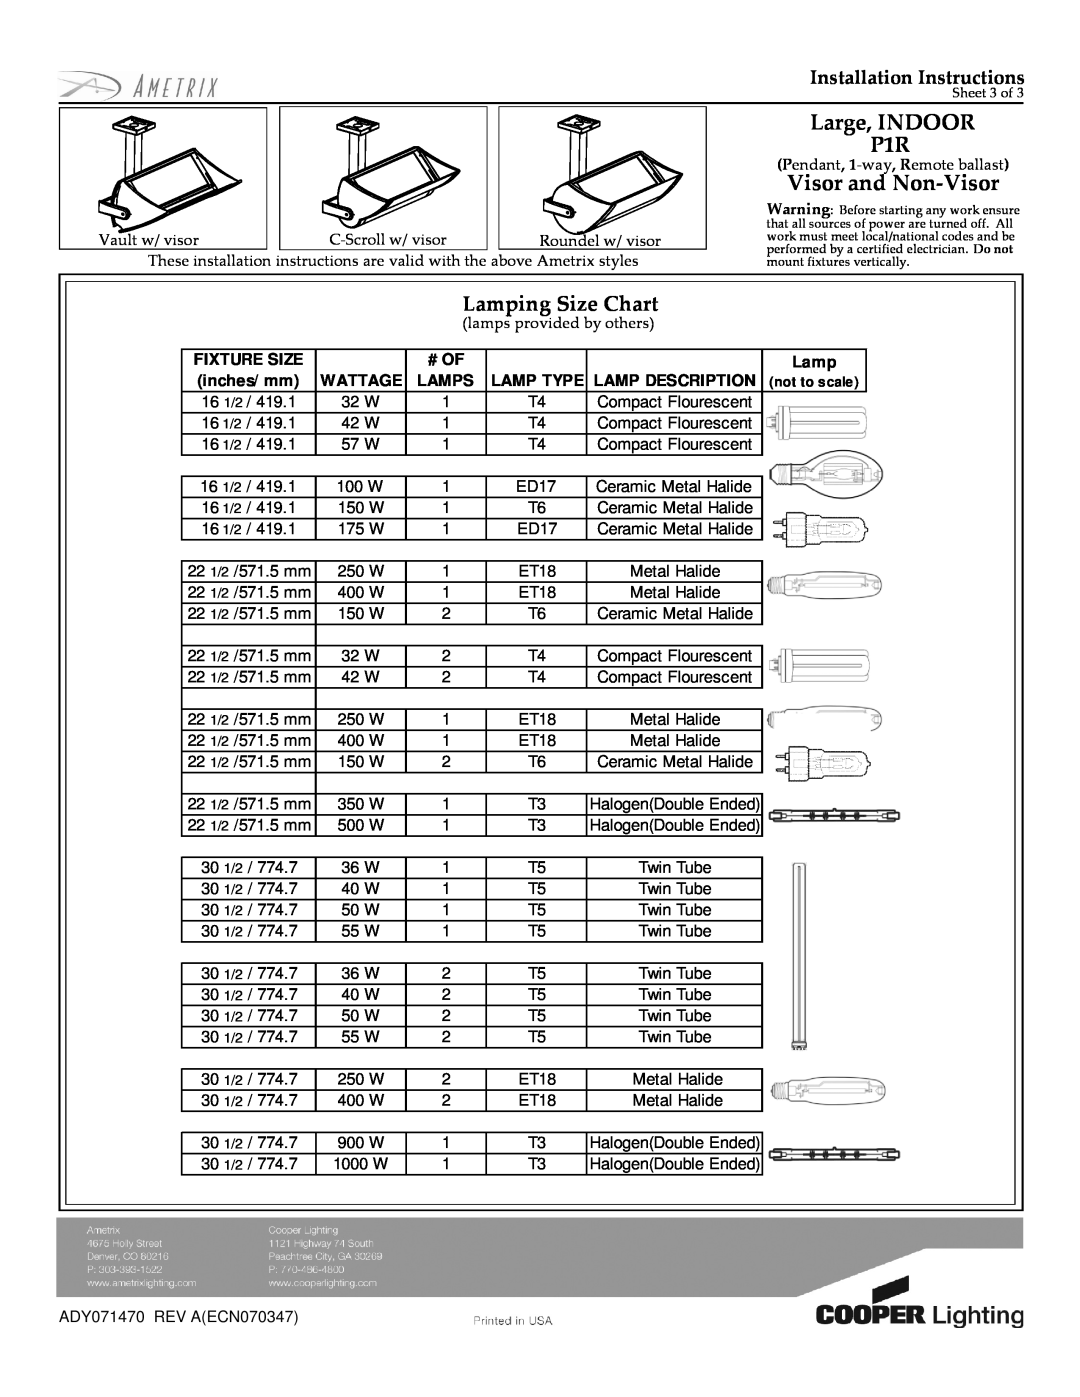 Cooper Lighting Indoor Lighting Lamping Size Chart, Large, INDOOR P1R, Visor and Non-Visor, Installation Instructions 